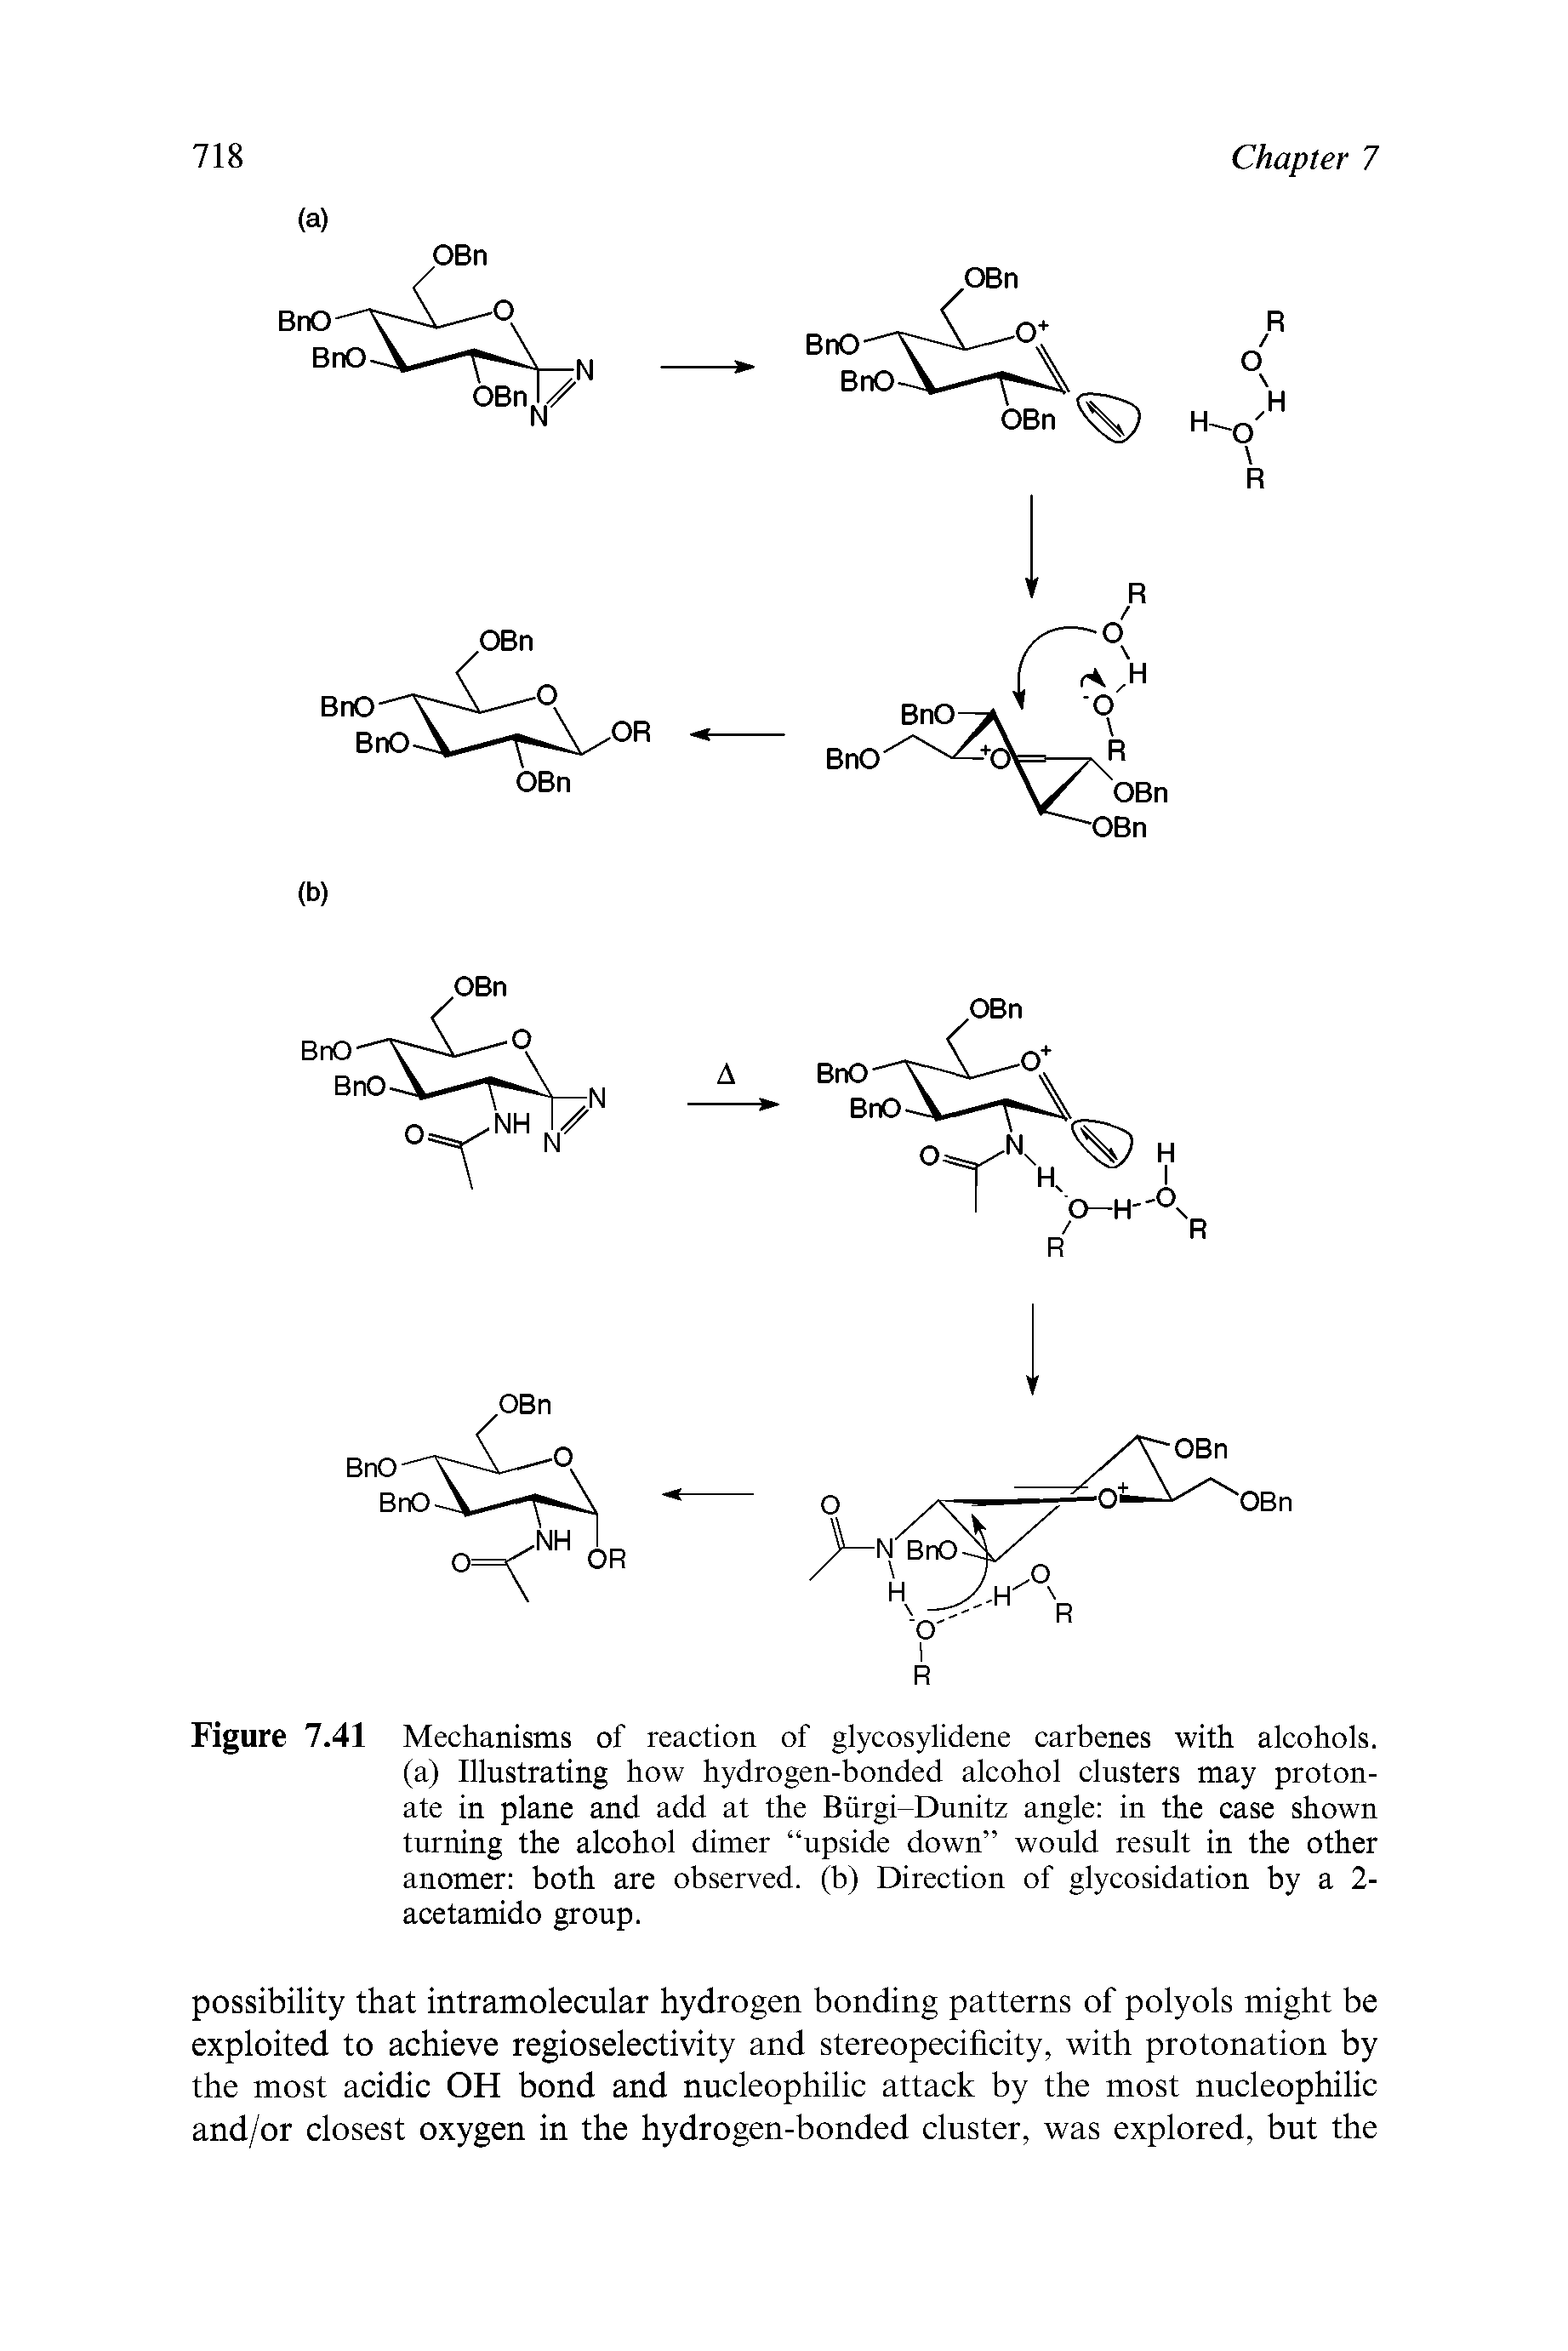 Figure 7.41 Mechanisms of reaction of glycosylidene carbenes with alcohols.